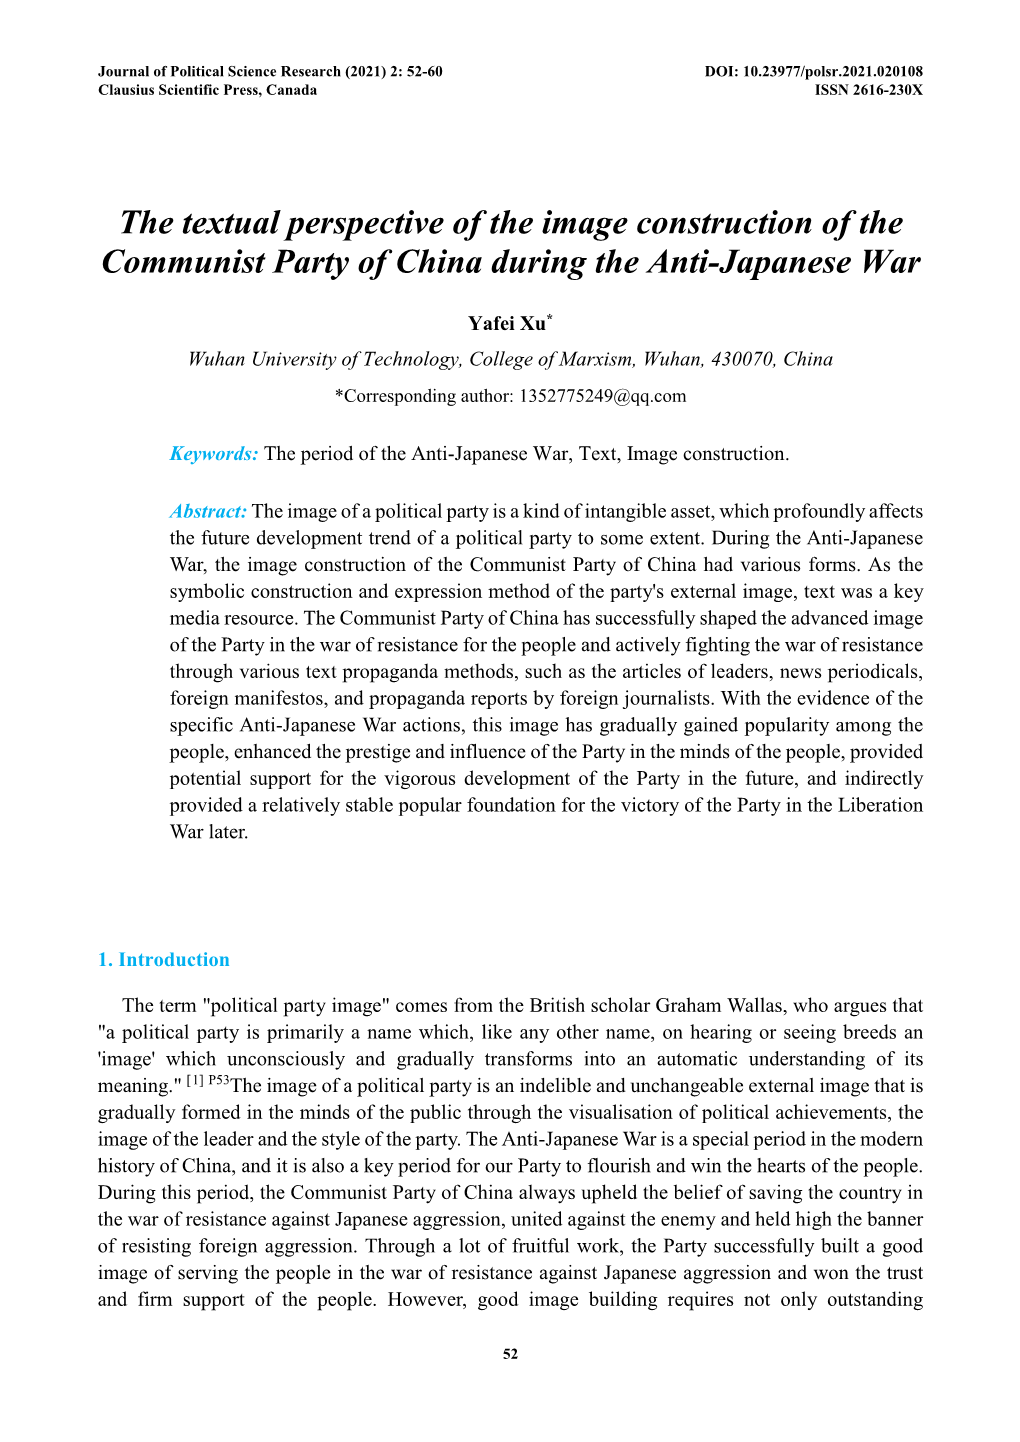 The Textual Perspective of the Image Construction of the Communist Party of China During the Anti-Japanese War